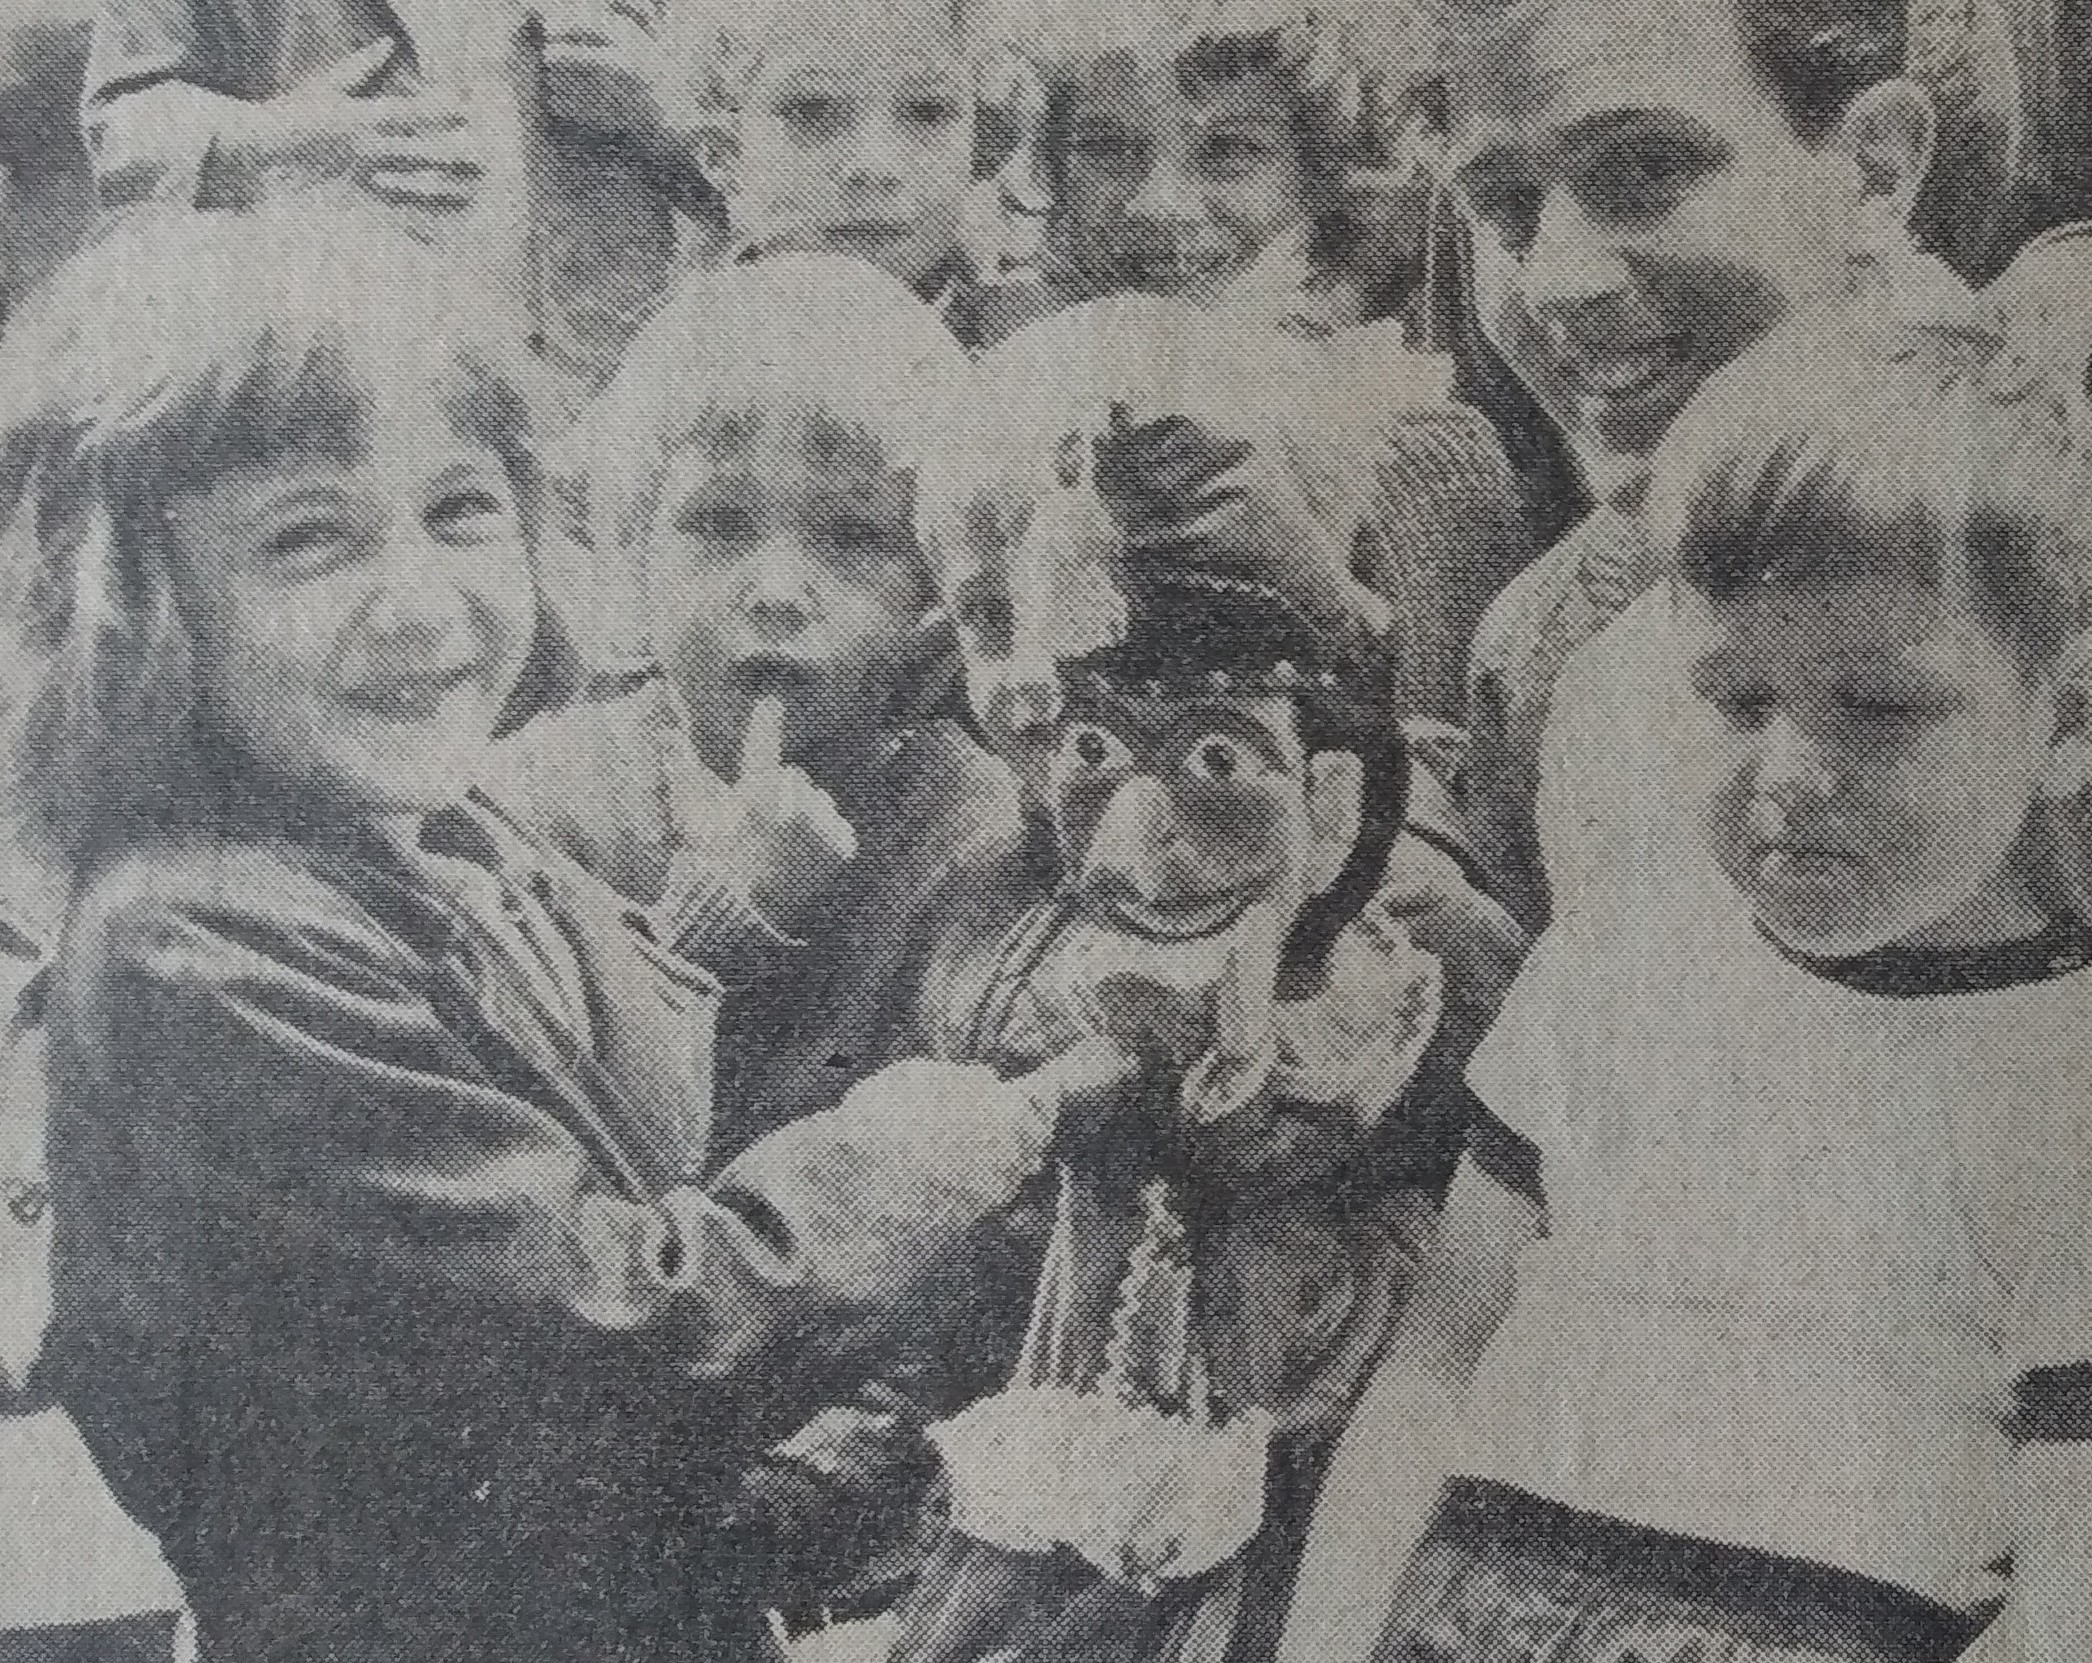 Its the 1971 show and Rosetta Lomonaco gets to meet Mr Punch